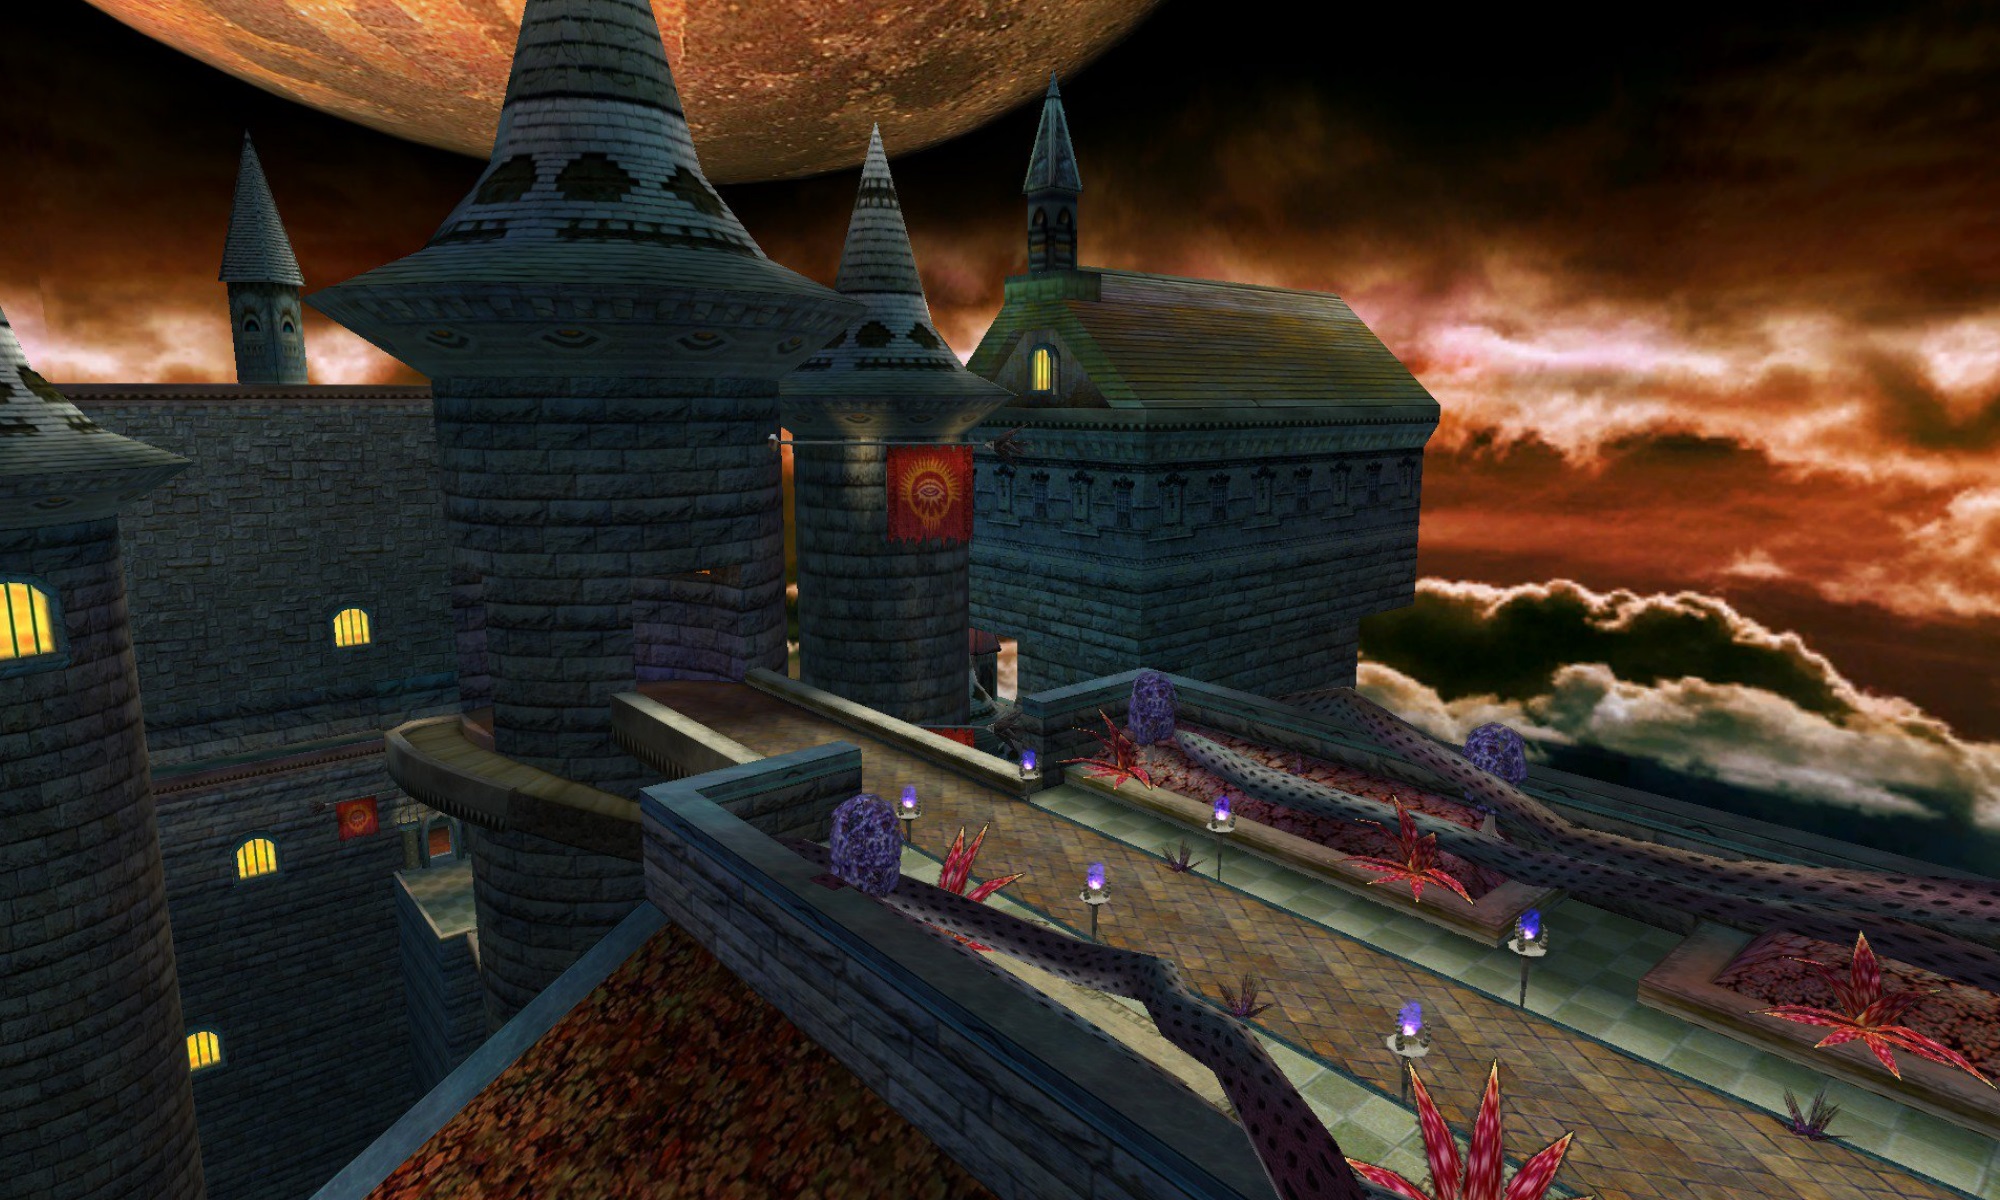 sonic heroes mystic mansion